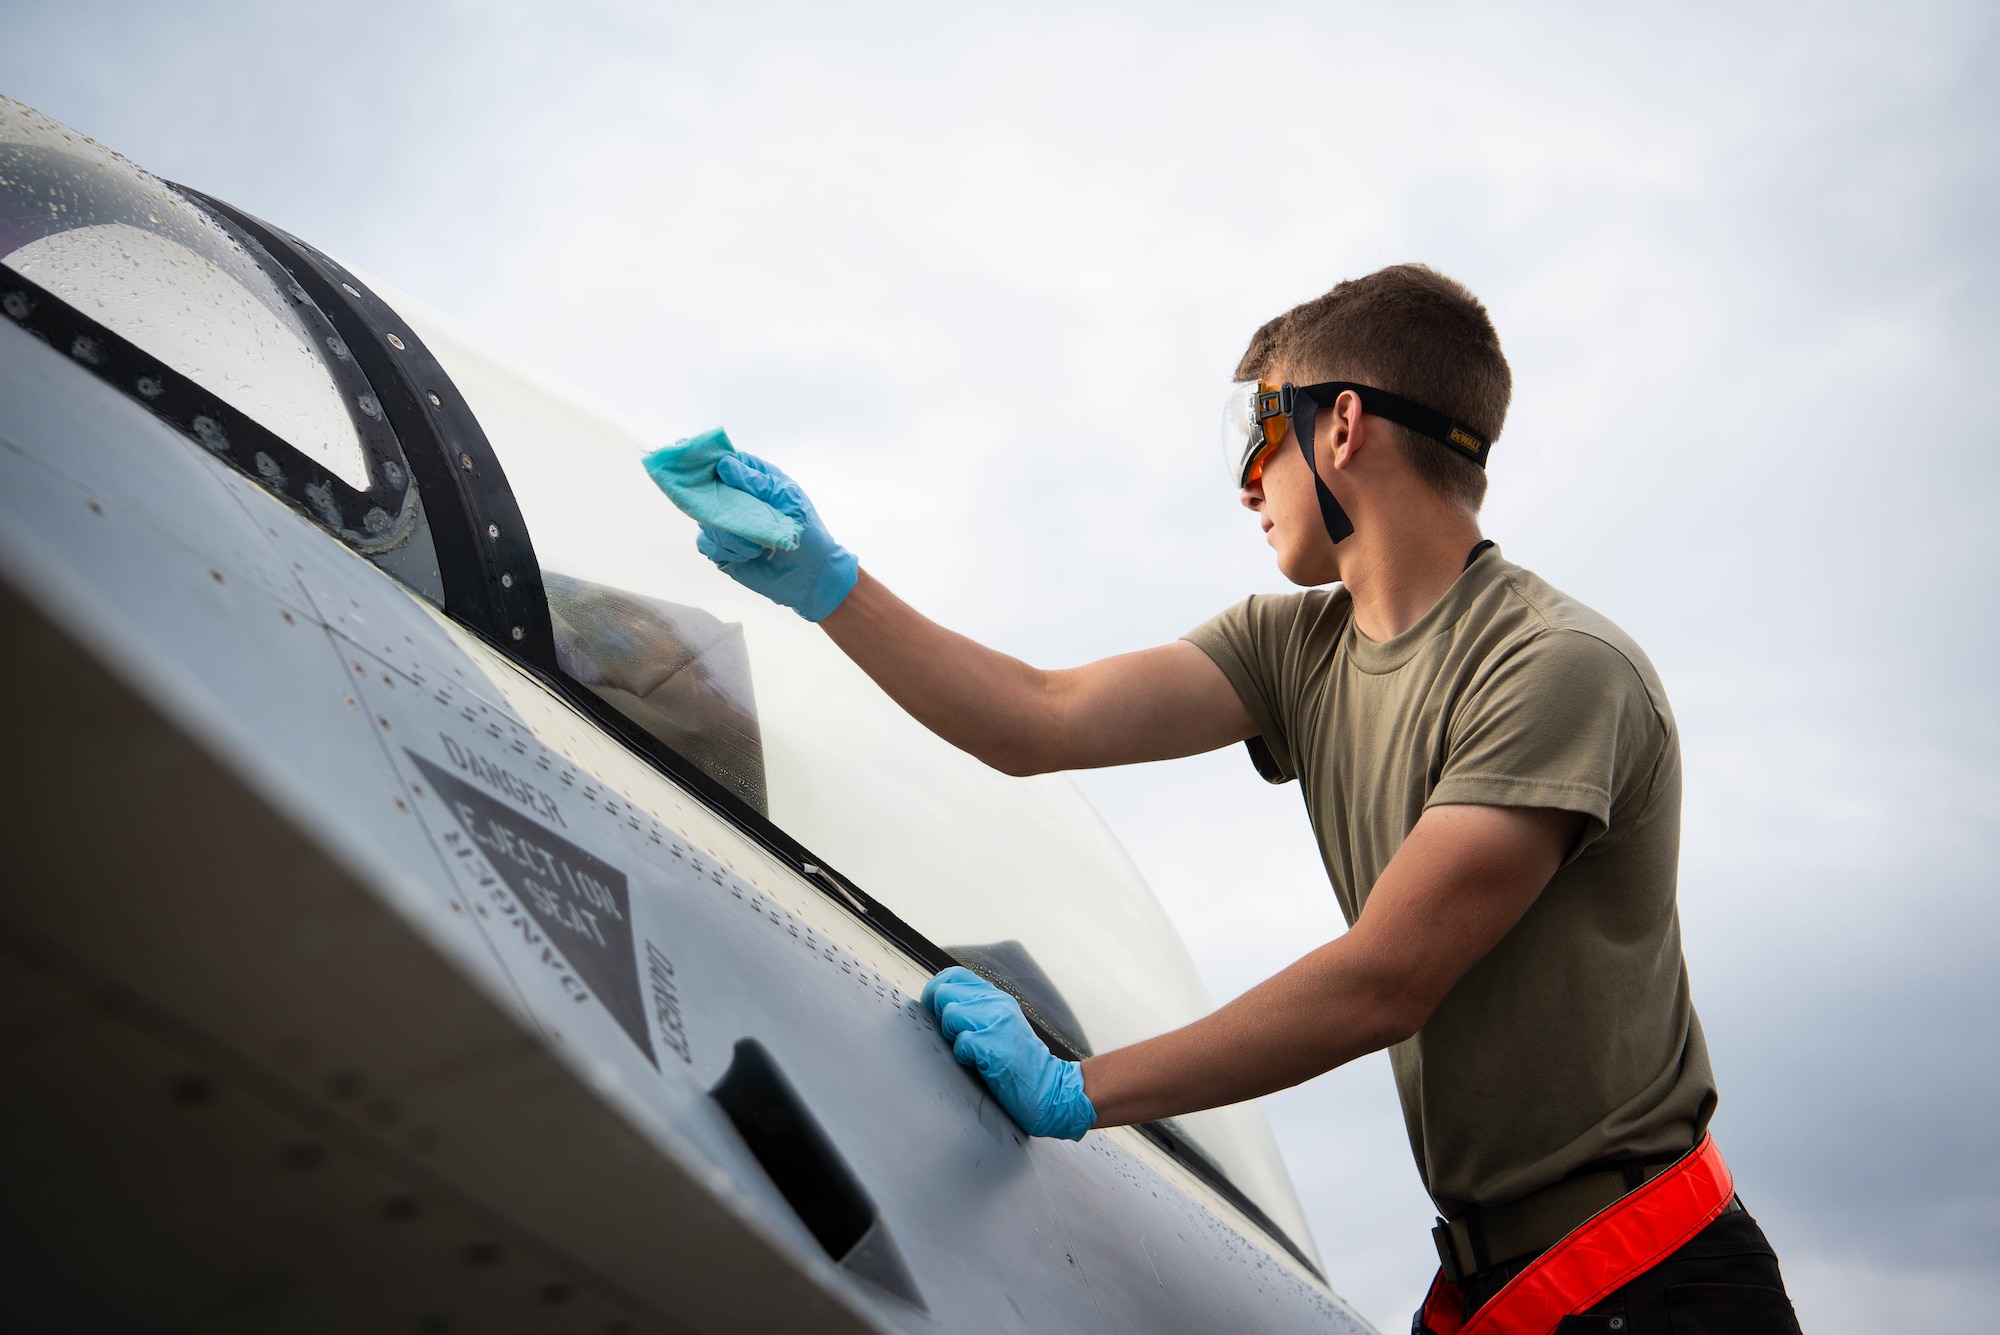 U.S. Air Force Airman 1st Class Rocky Clinch,18th Aircraft Maintenance Unit aircraft maintenance apprentice, wipes down the canopy on an F-16 FIghting Falcon fighter jet at Eielson Air Force Base, Alaska, June 20, 2022. Airmen assigned to the 18th AMU conduct checks and perform maintenance before, during and after jets are in the air. (U.S. Air Force photo by Airman 1st Class Ricardo Sandoval)